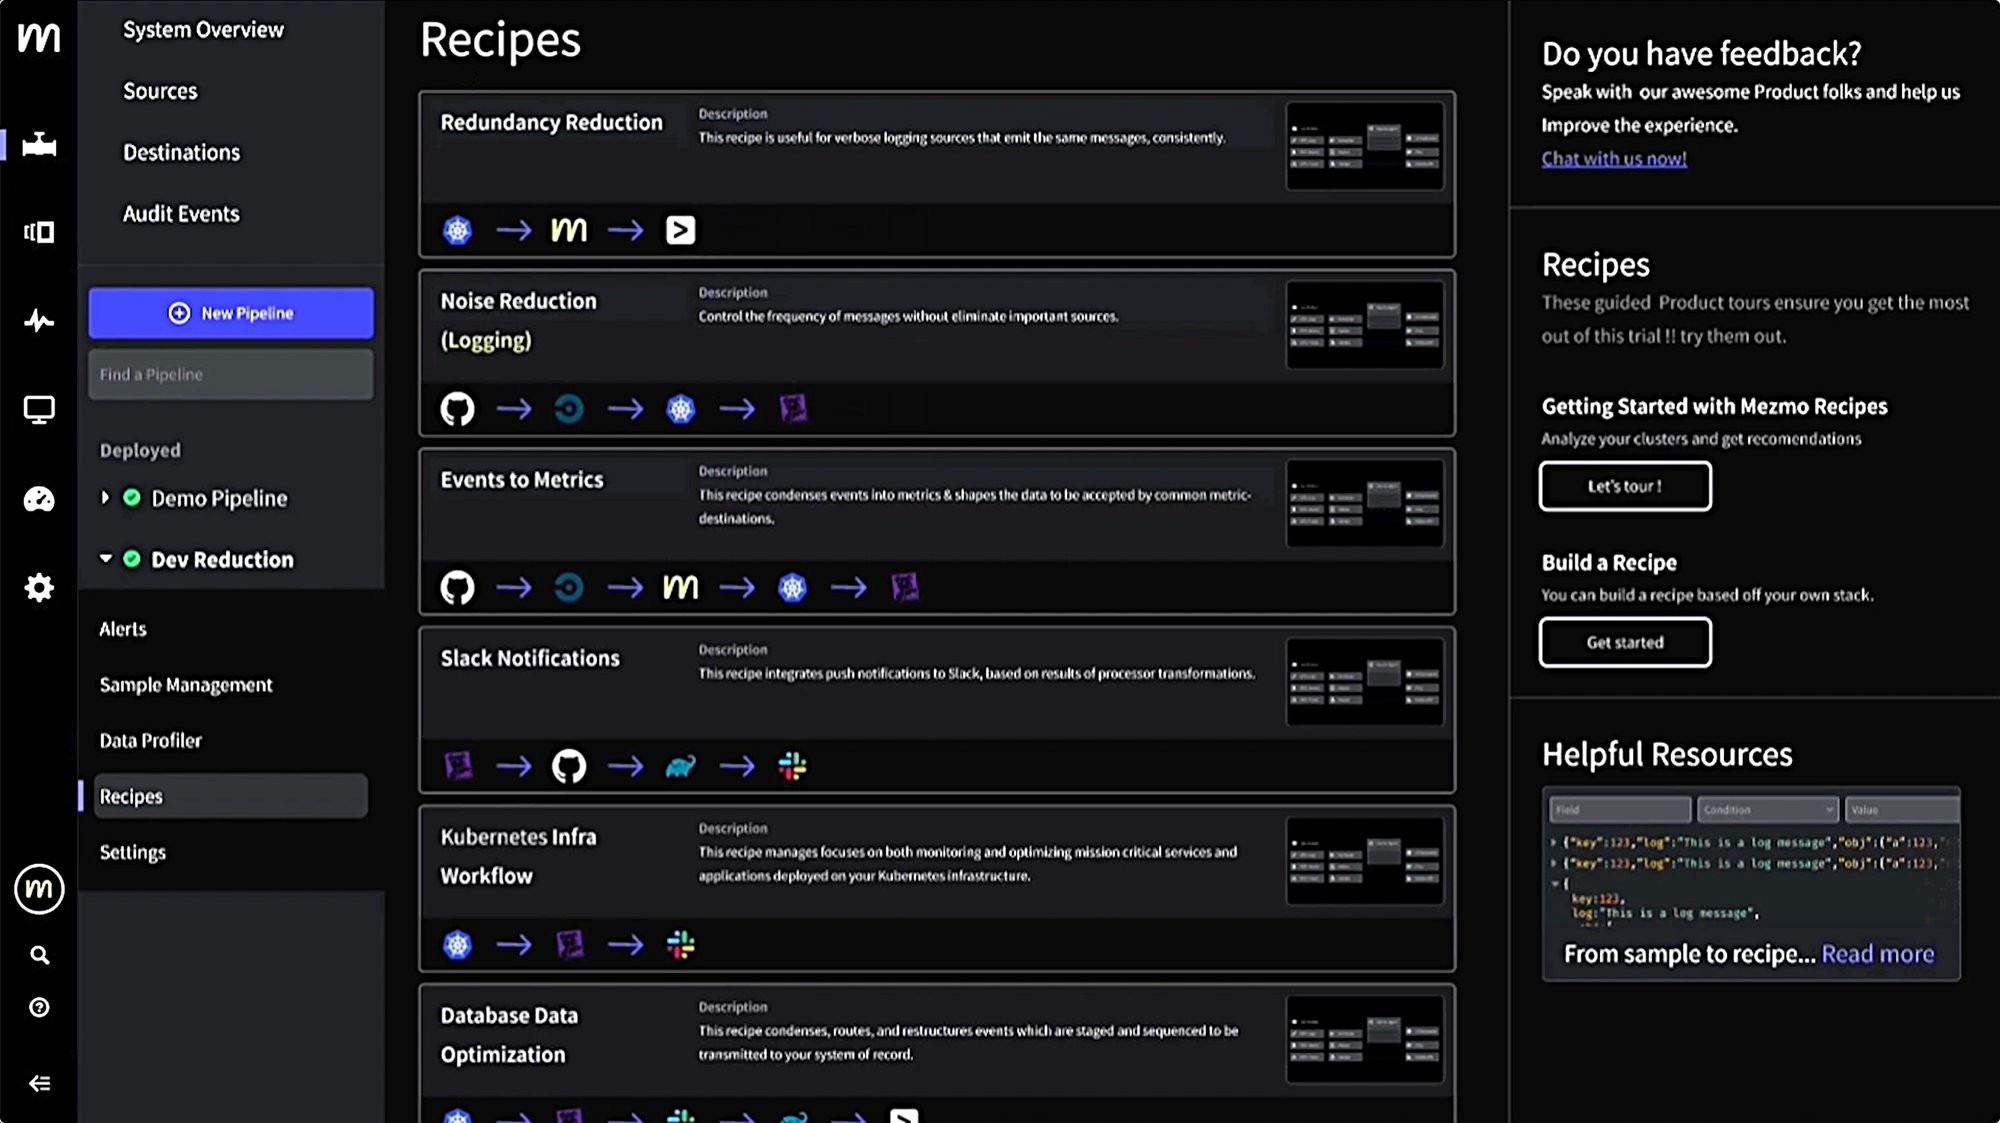 Recipes Static Screen from Demo 